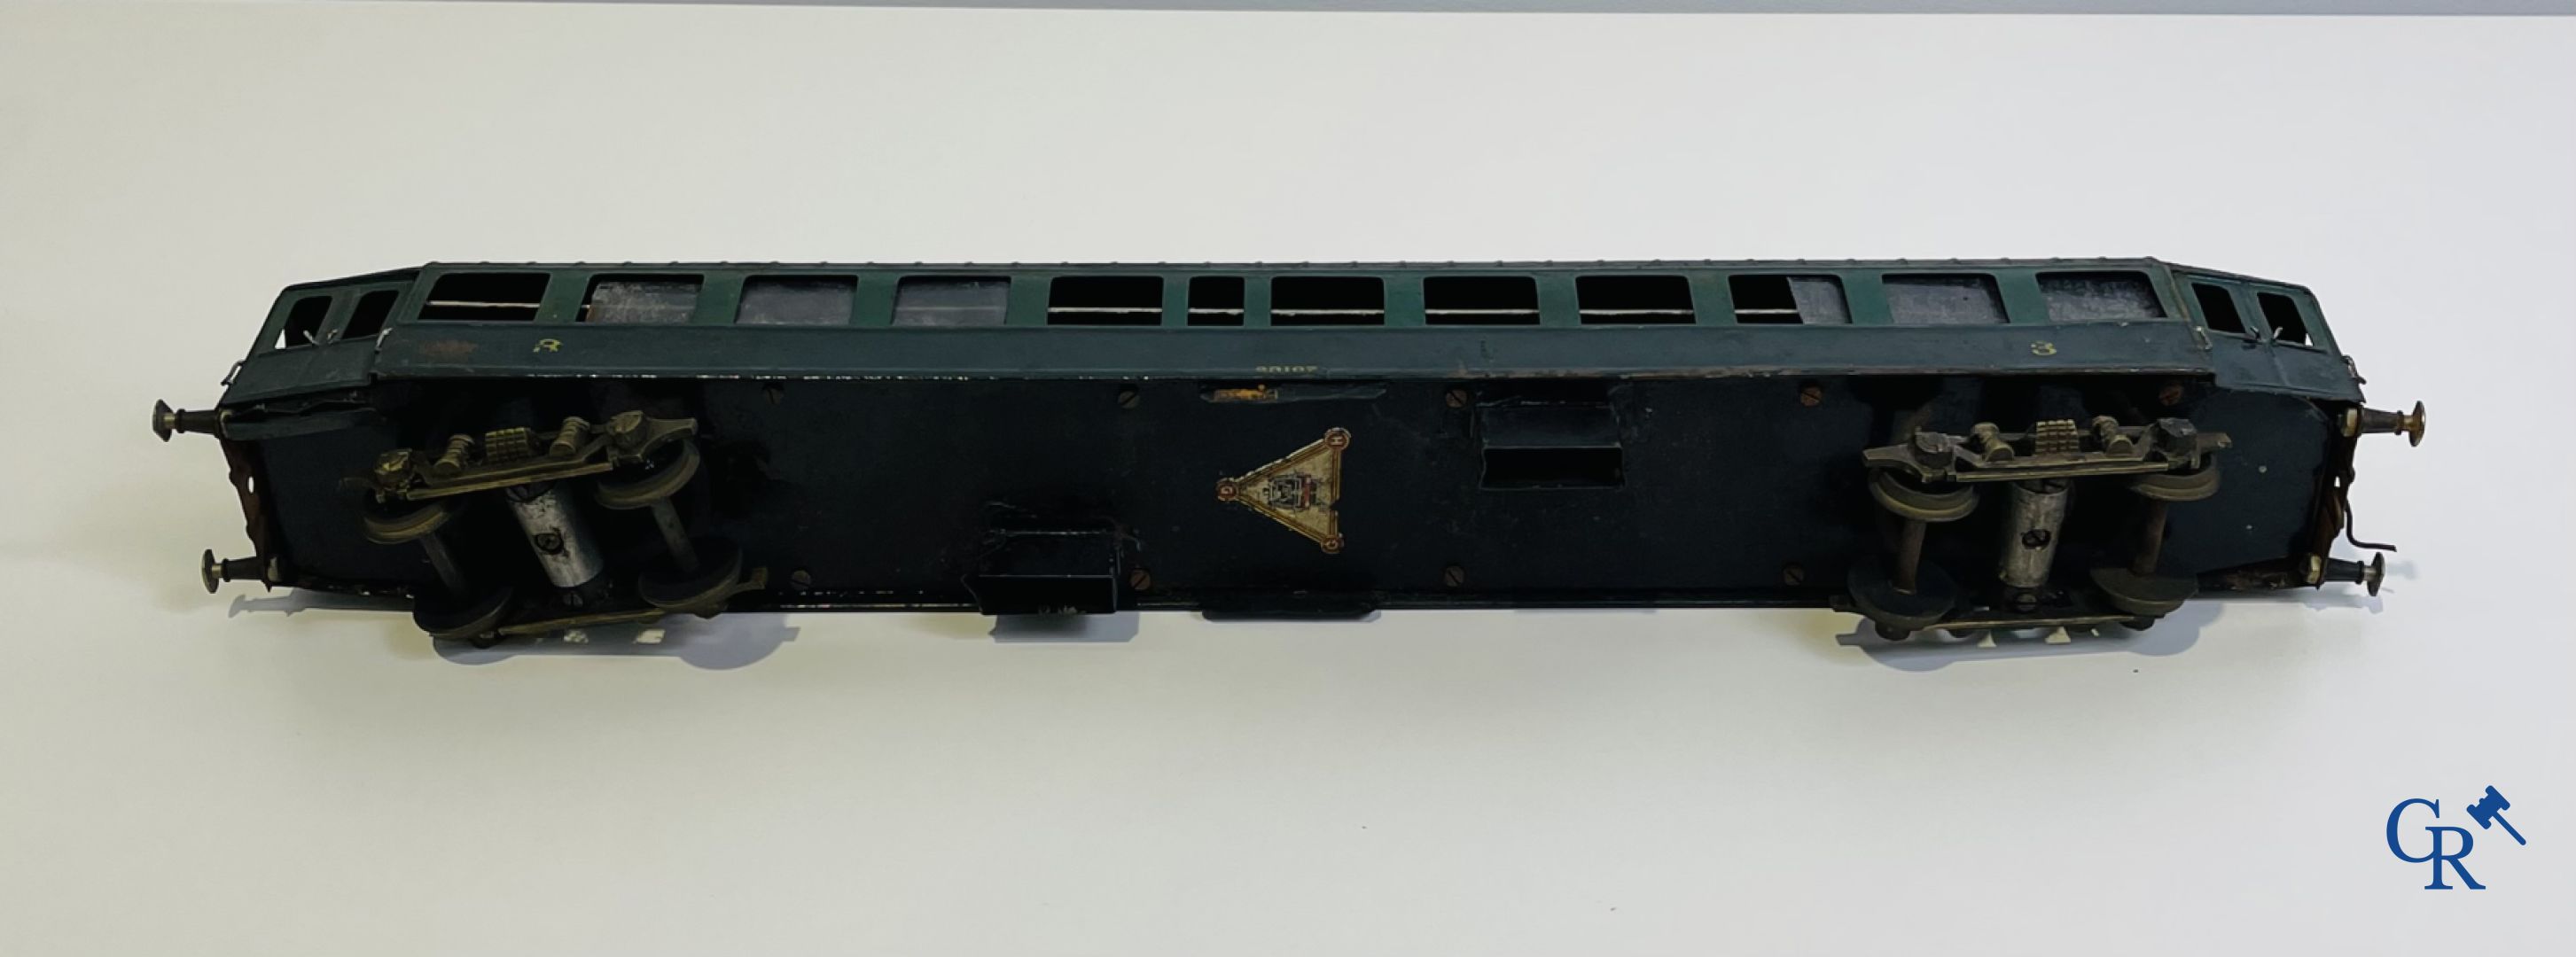 Old toys: Märklin, Locomotive with towing tender and dining car.
About 1930. - Image 20 of 32